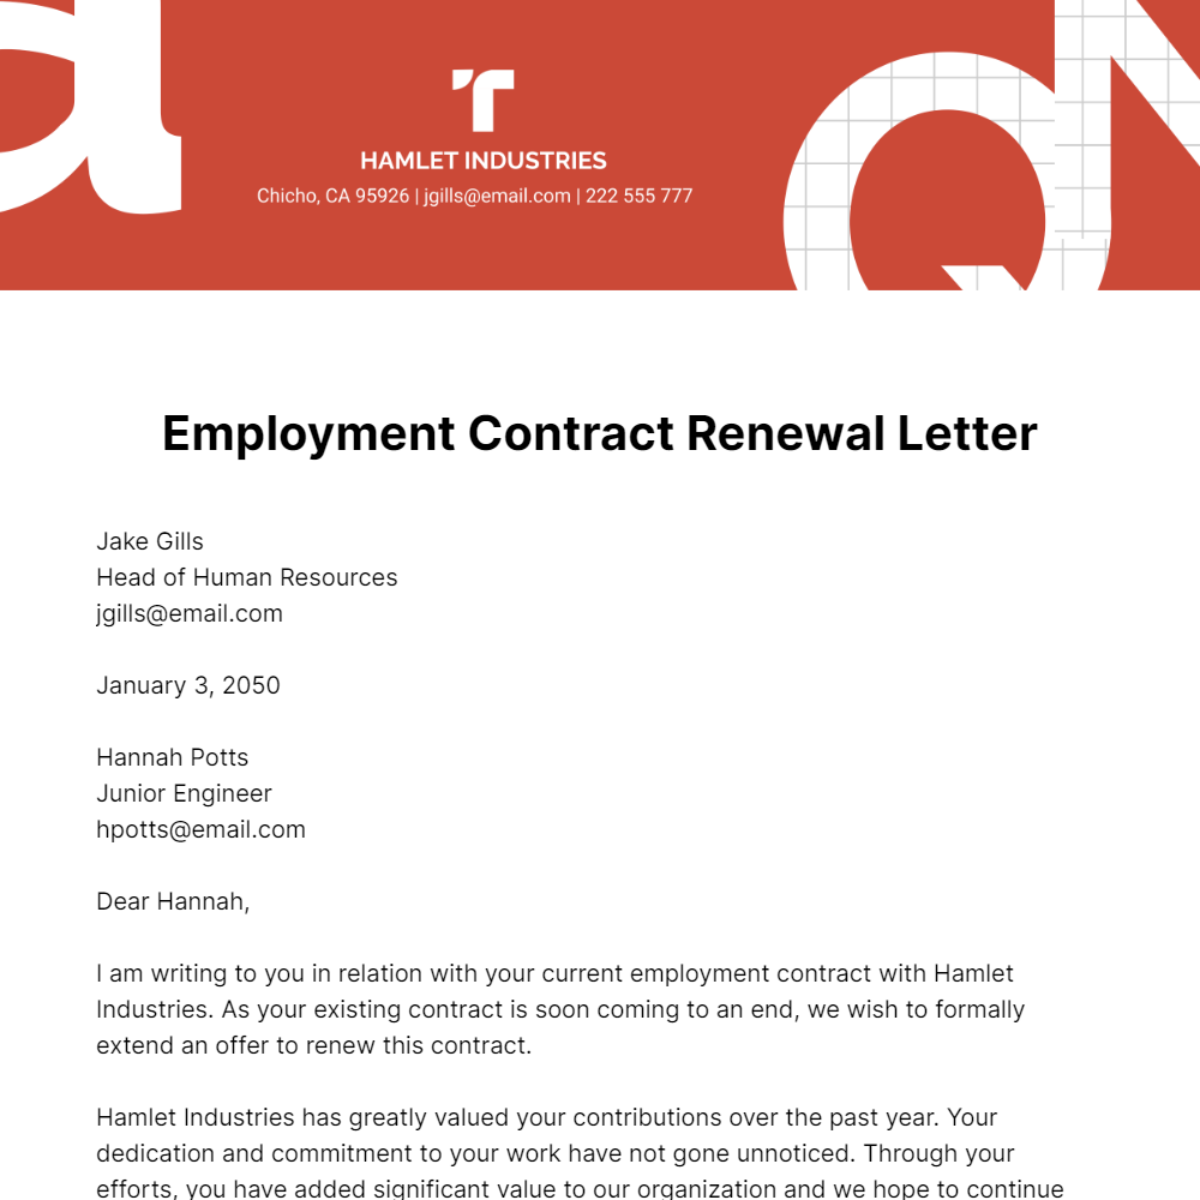 Employment Contract Renewal Letter   Template